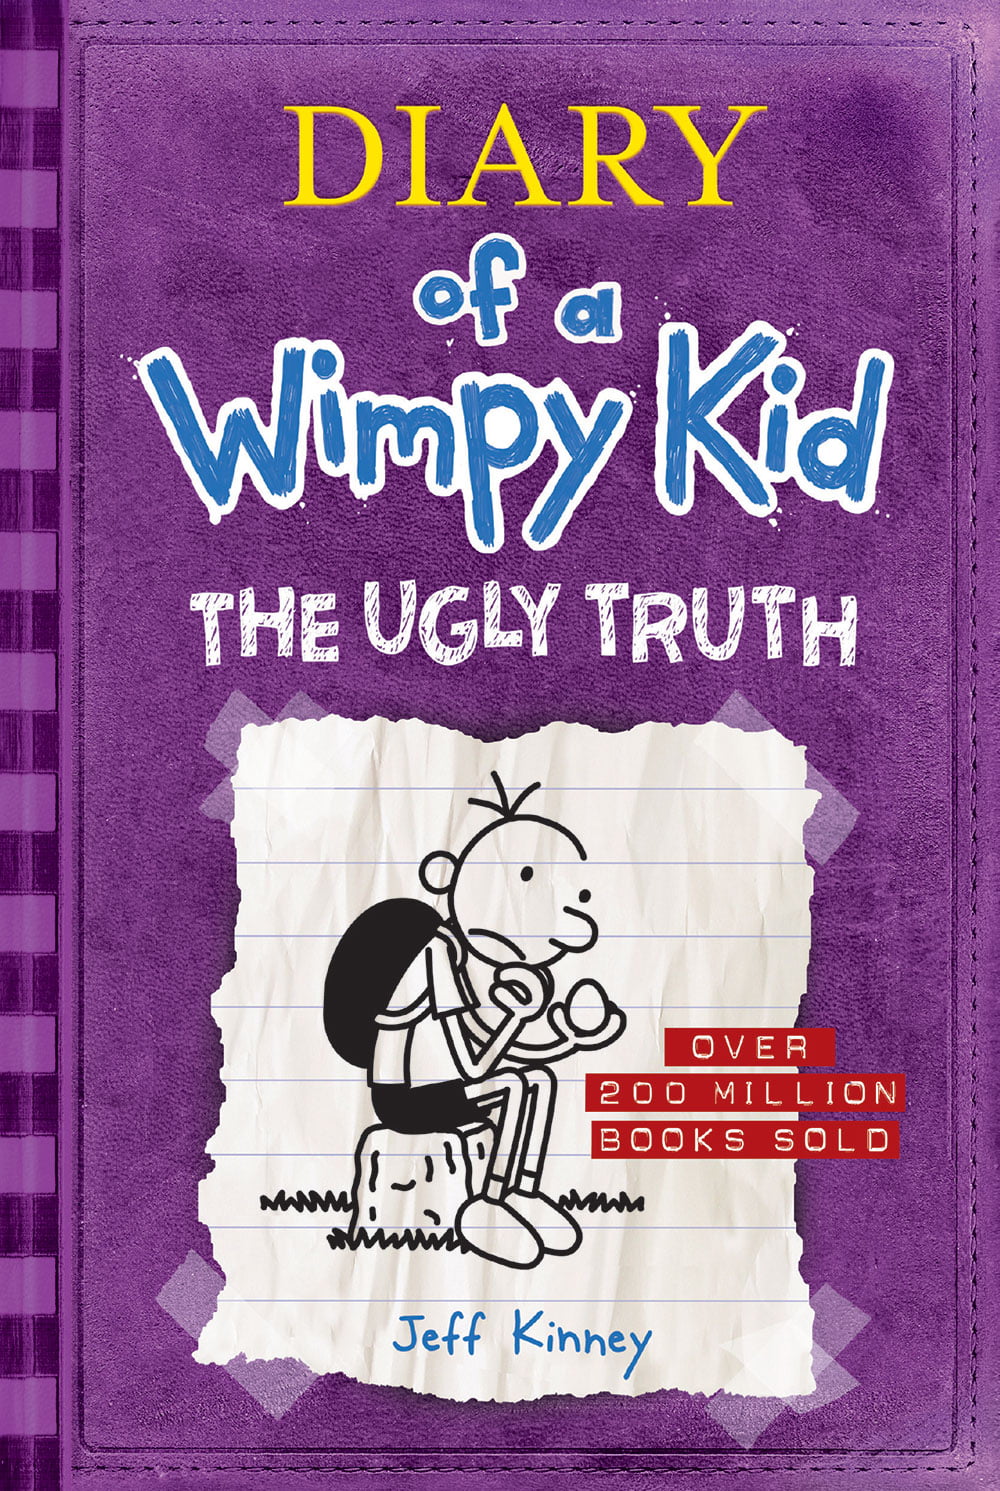 Diarly of a wimpy kid series - stopmyte